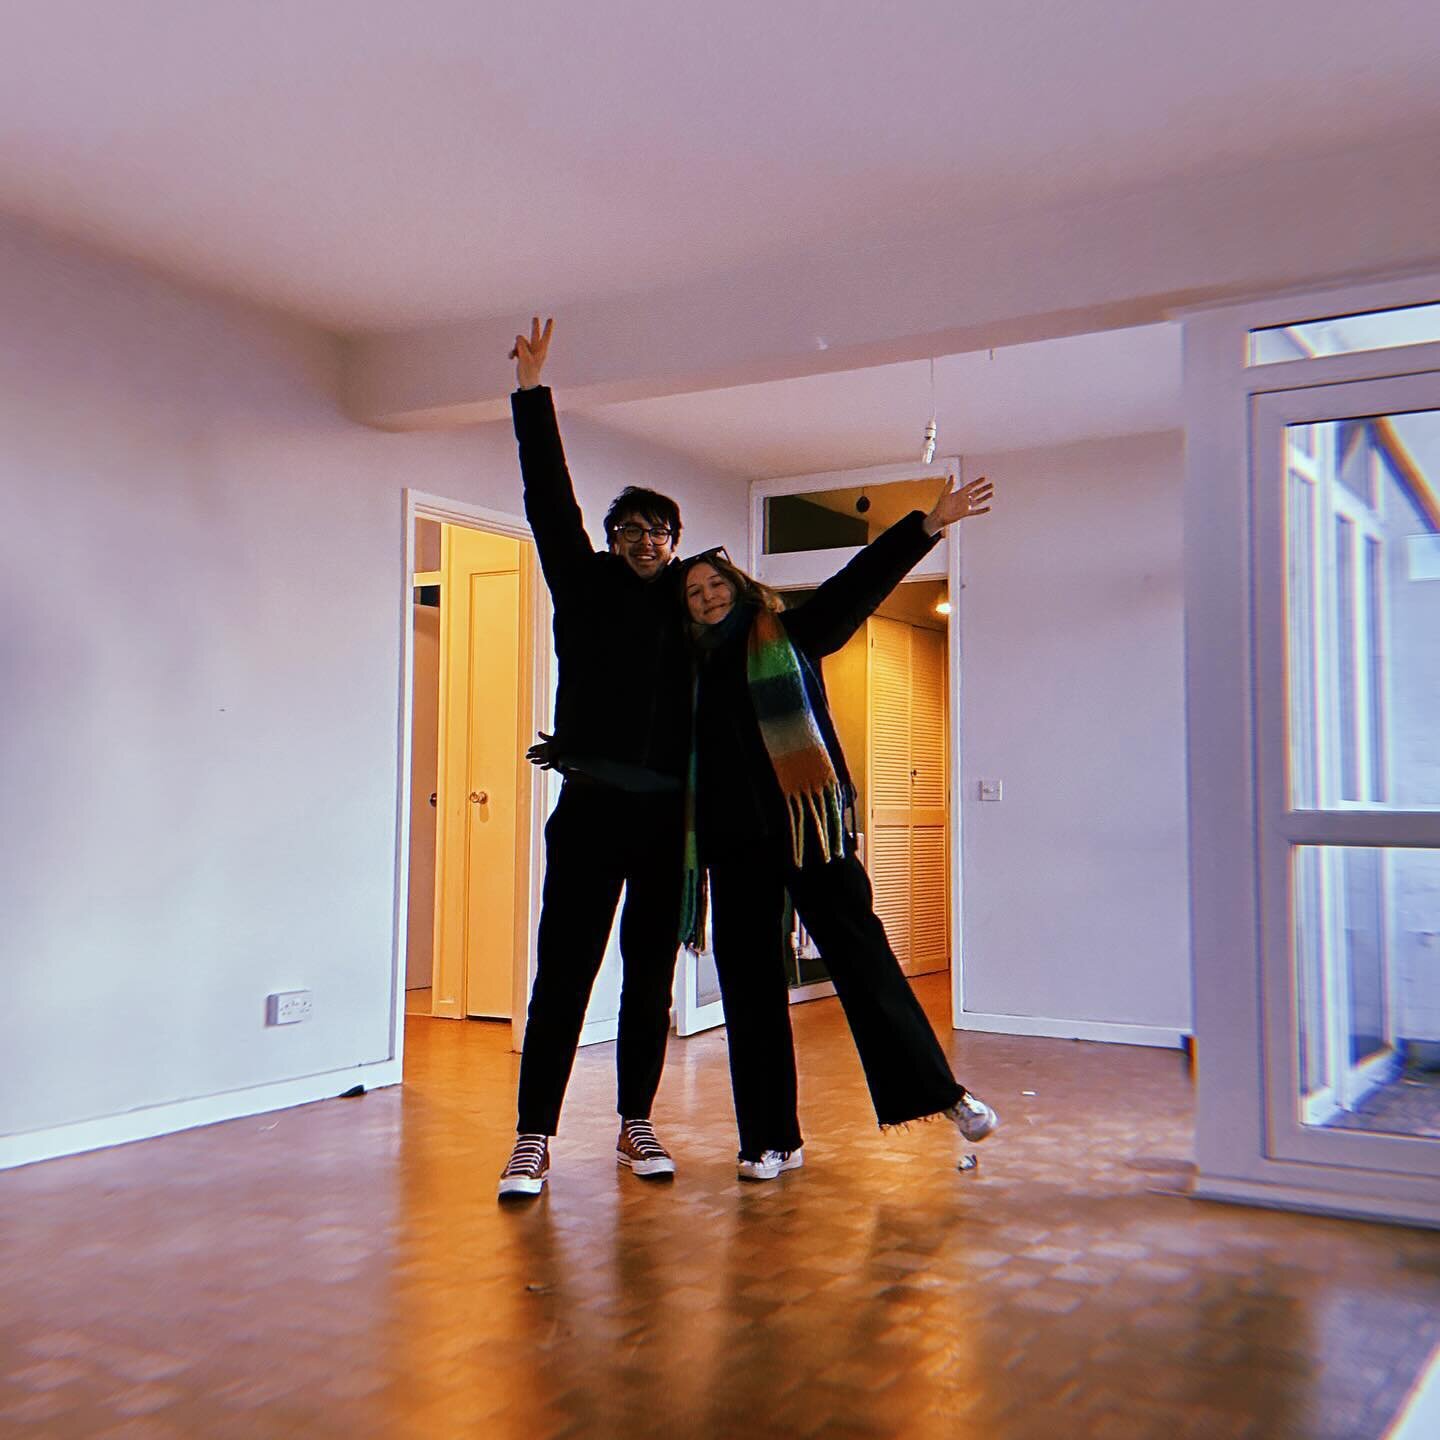 We bought a flat! 🔑 honestly something I never thought I&rsquo;d do or post about. Been a long journey since we put in an offer last summer but we moved in Feb (with a colossus army of friends + fam who helped us 🚐📦) and we&rsquo;re loving it, las